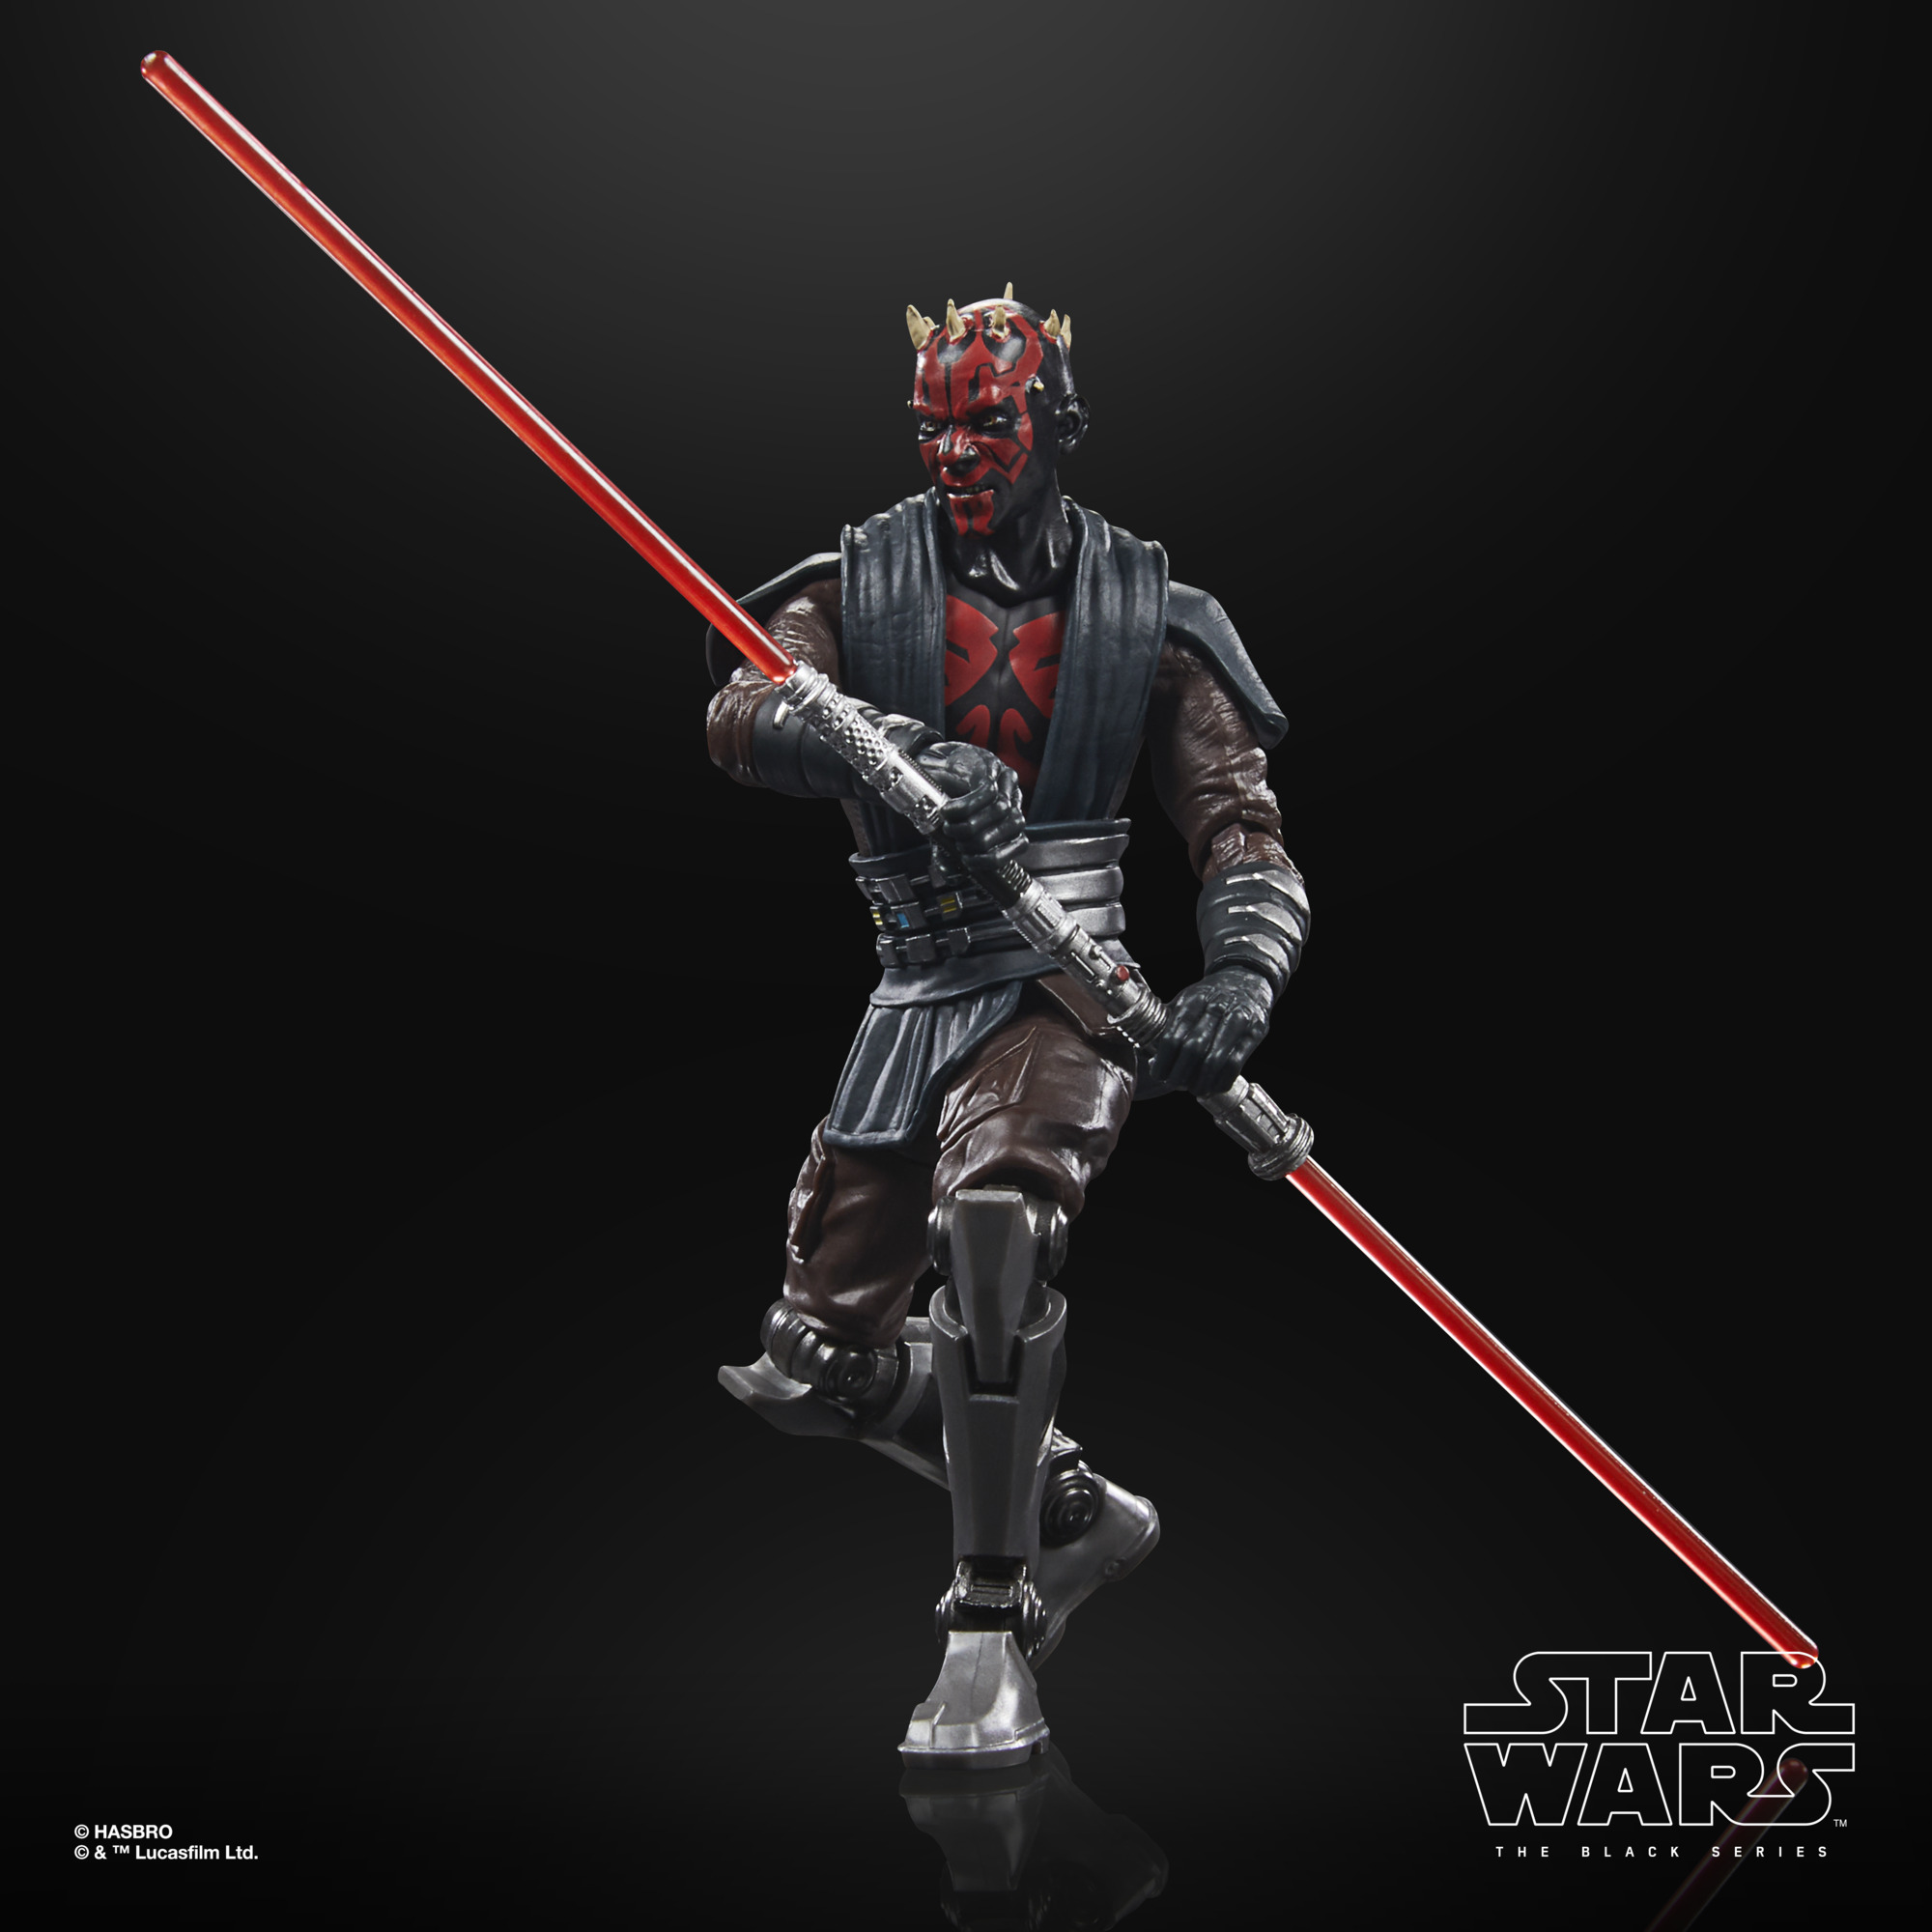 Slideshow of image showing the figure from different angles. Text on screen reads Star Wars the Black Series